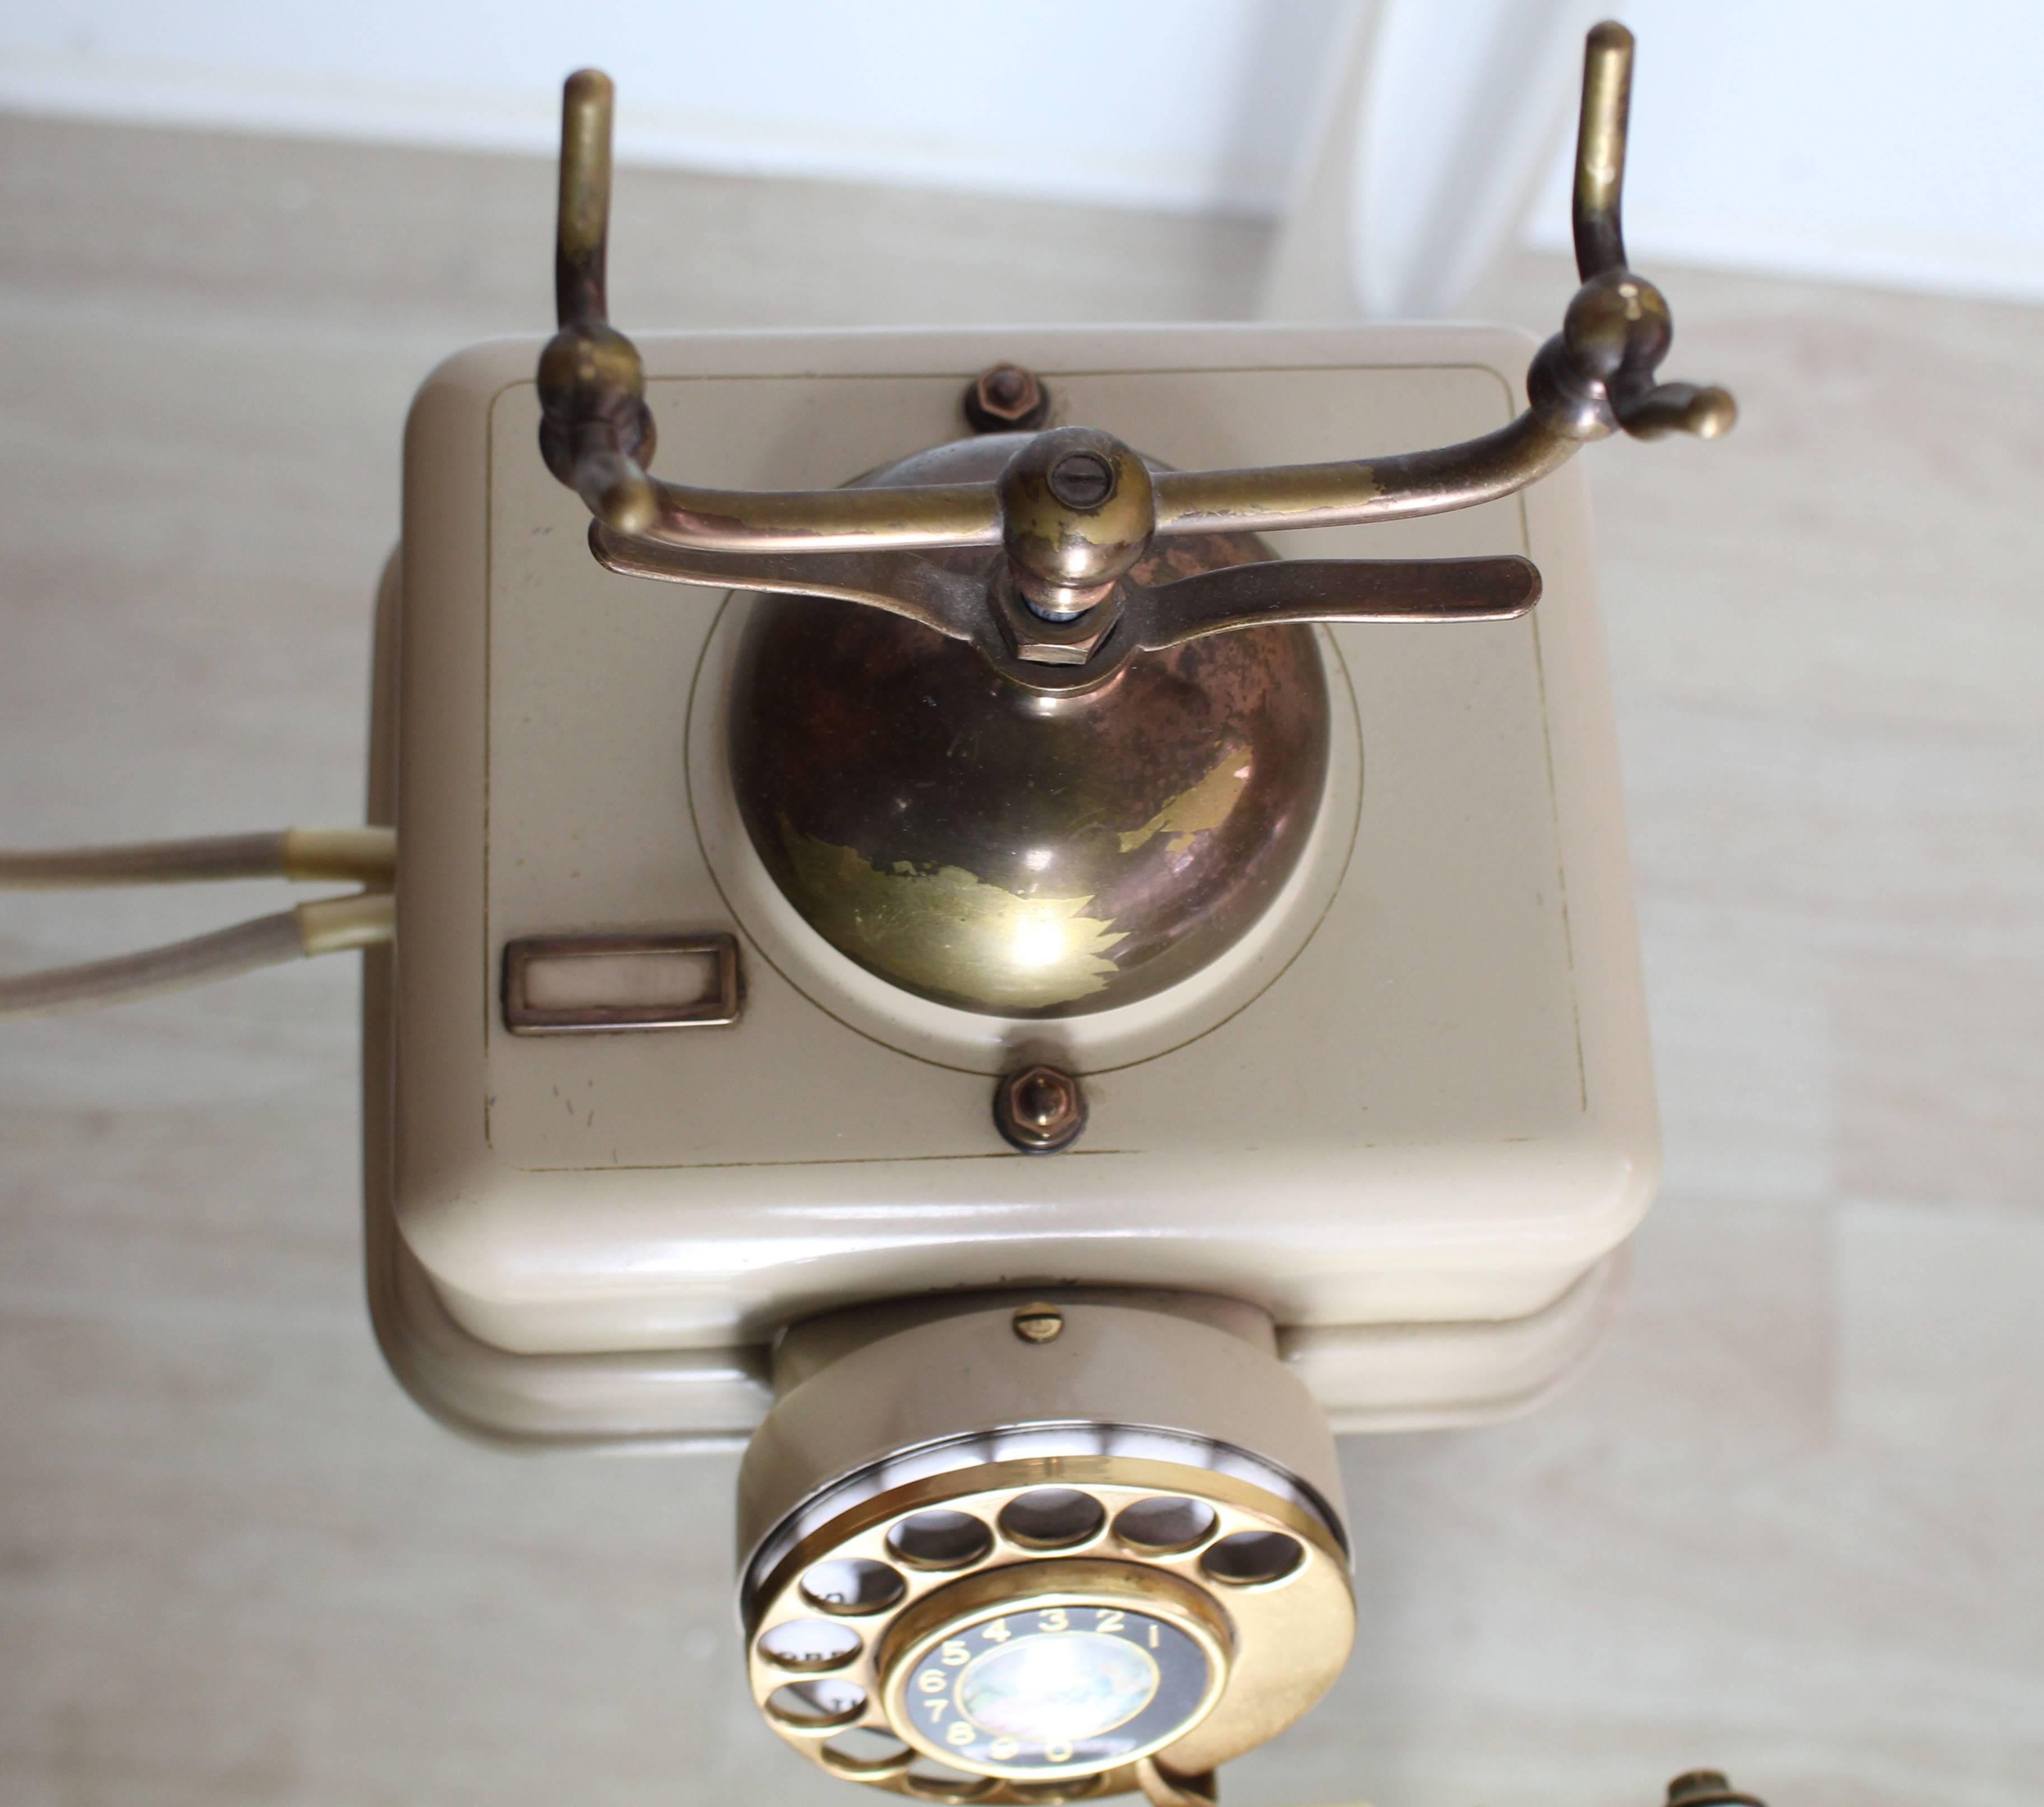 Excellent original condition antique vintage rotary telephone. Creme color plastic and brass materials combination.